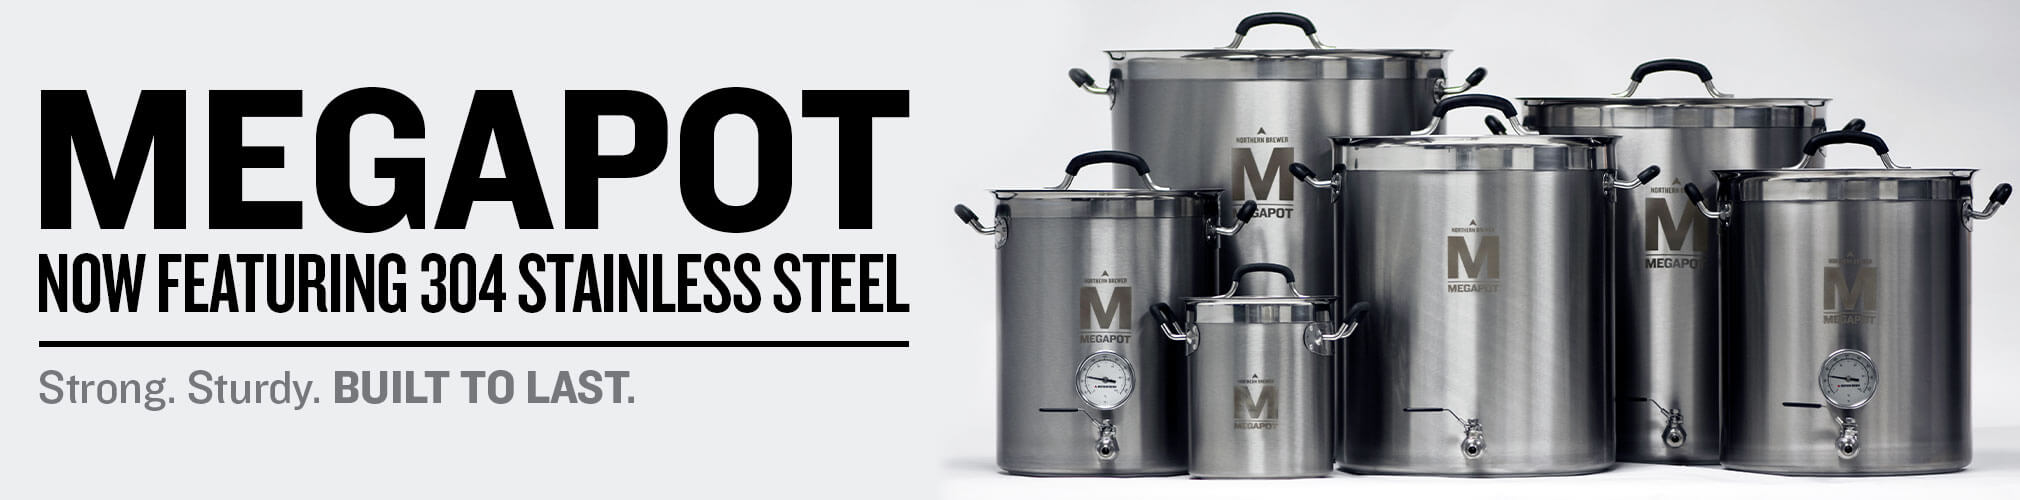 MegaPot now featuring 304 Stainless Steel. Strong, sturdy, built to last.